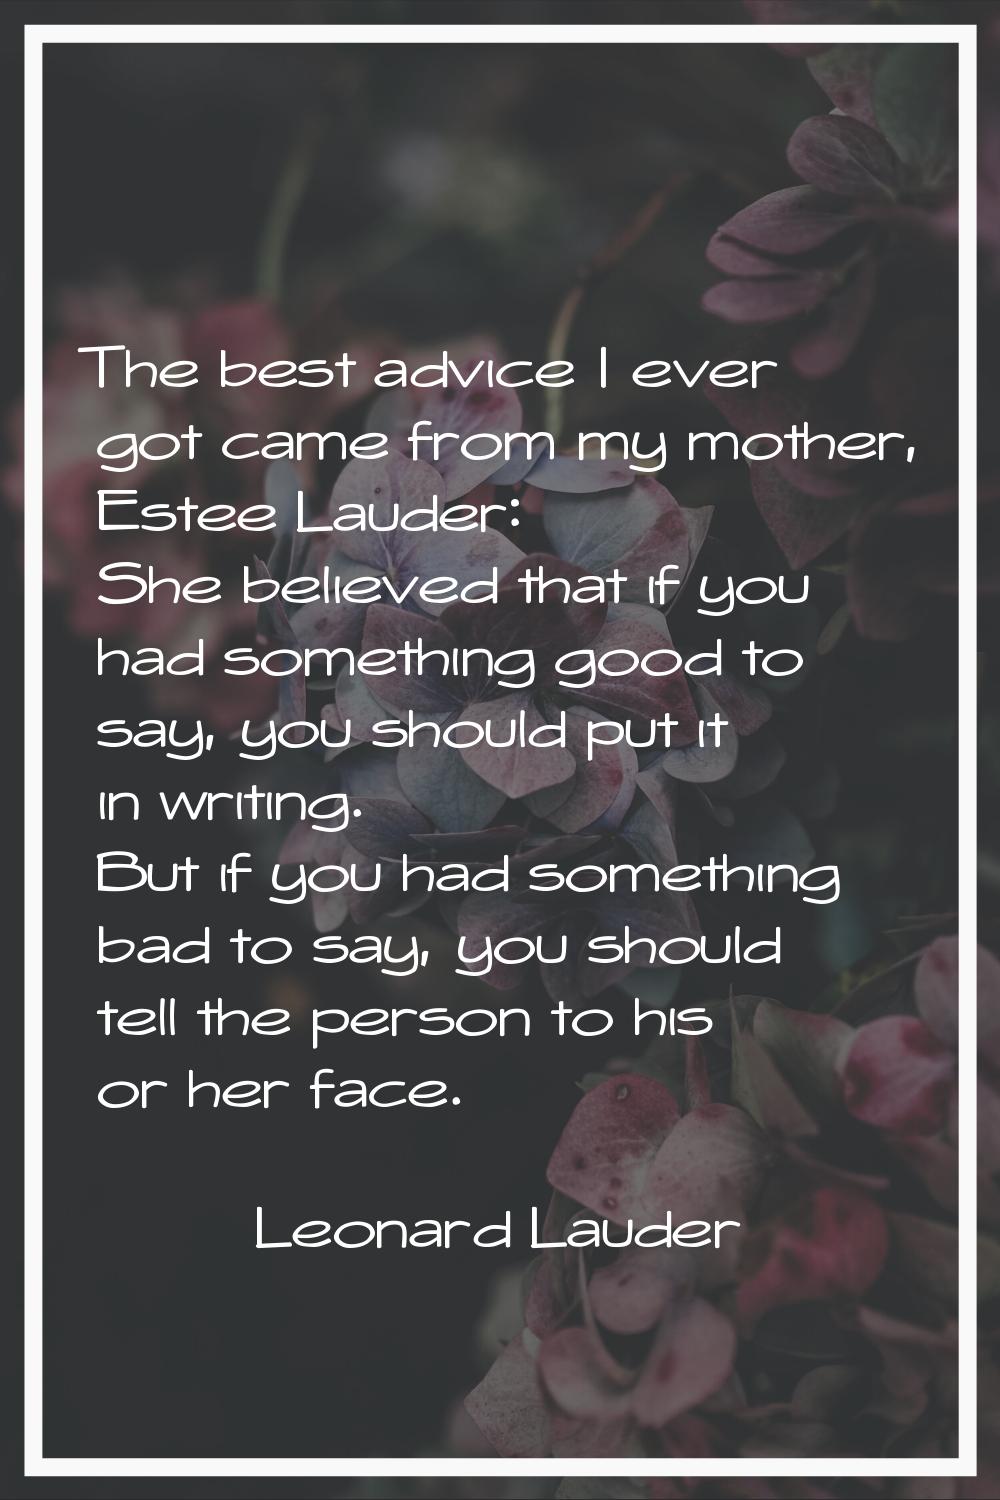 The best advice I ever got came from my mother, Estee Lauder: She believed that if you had somethin